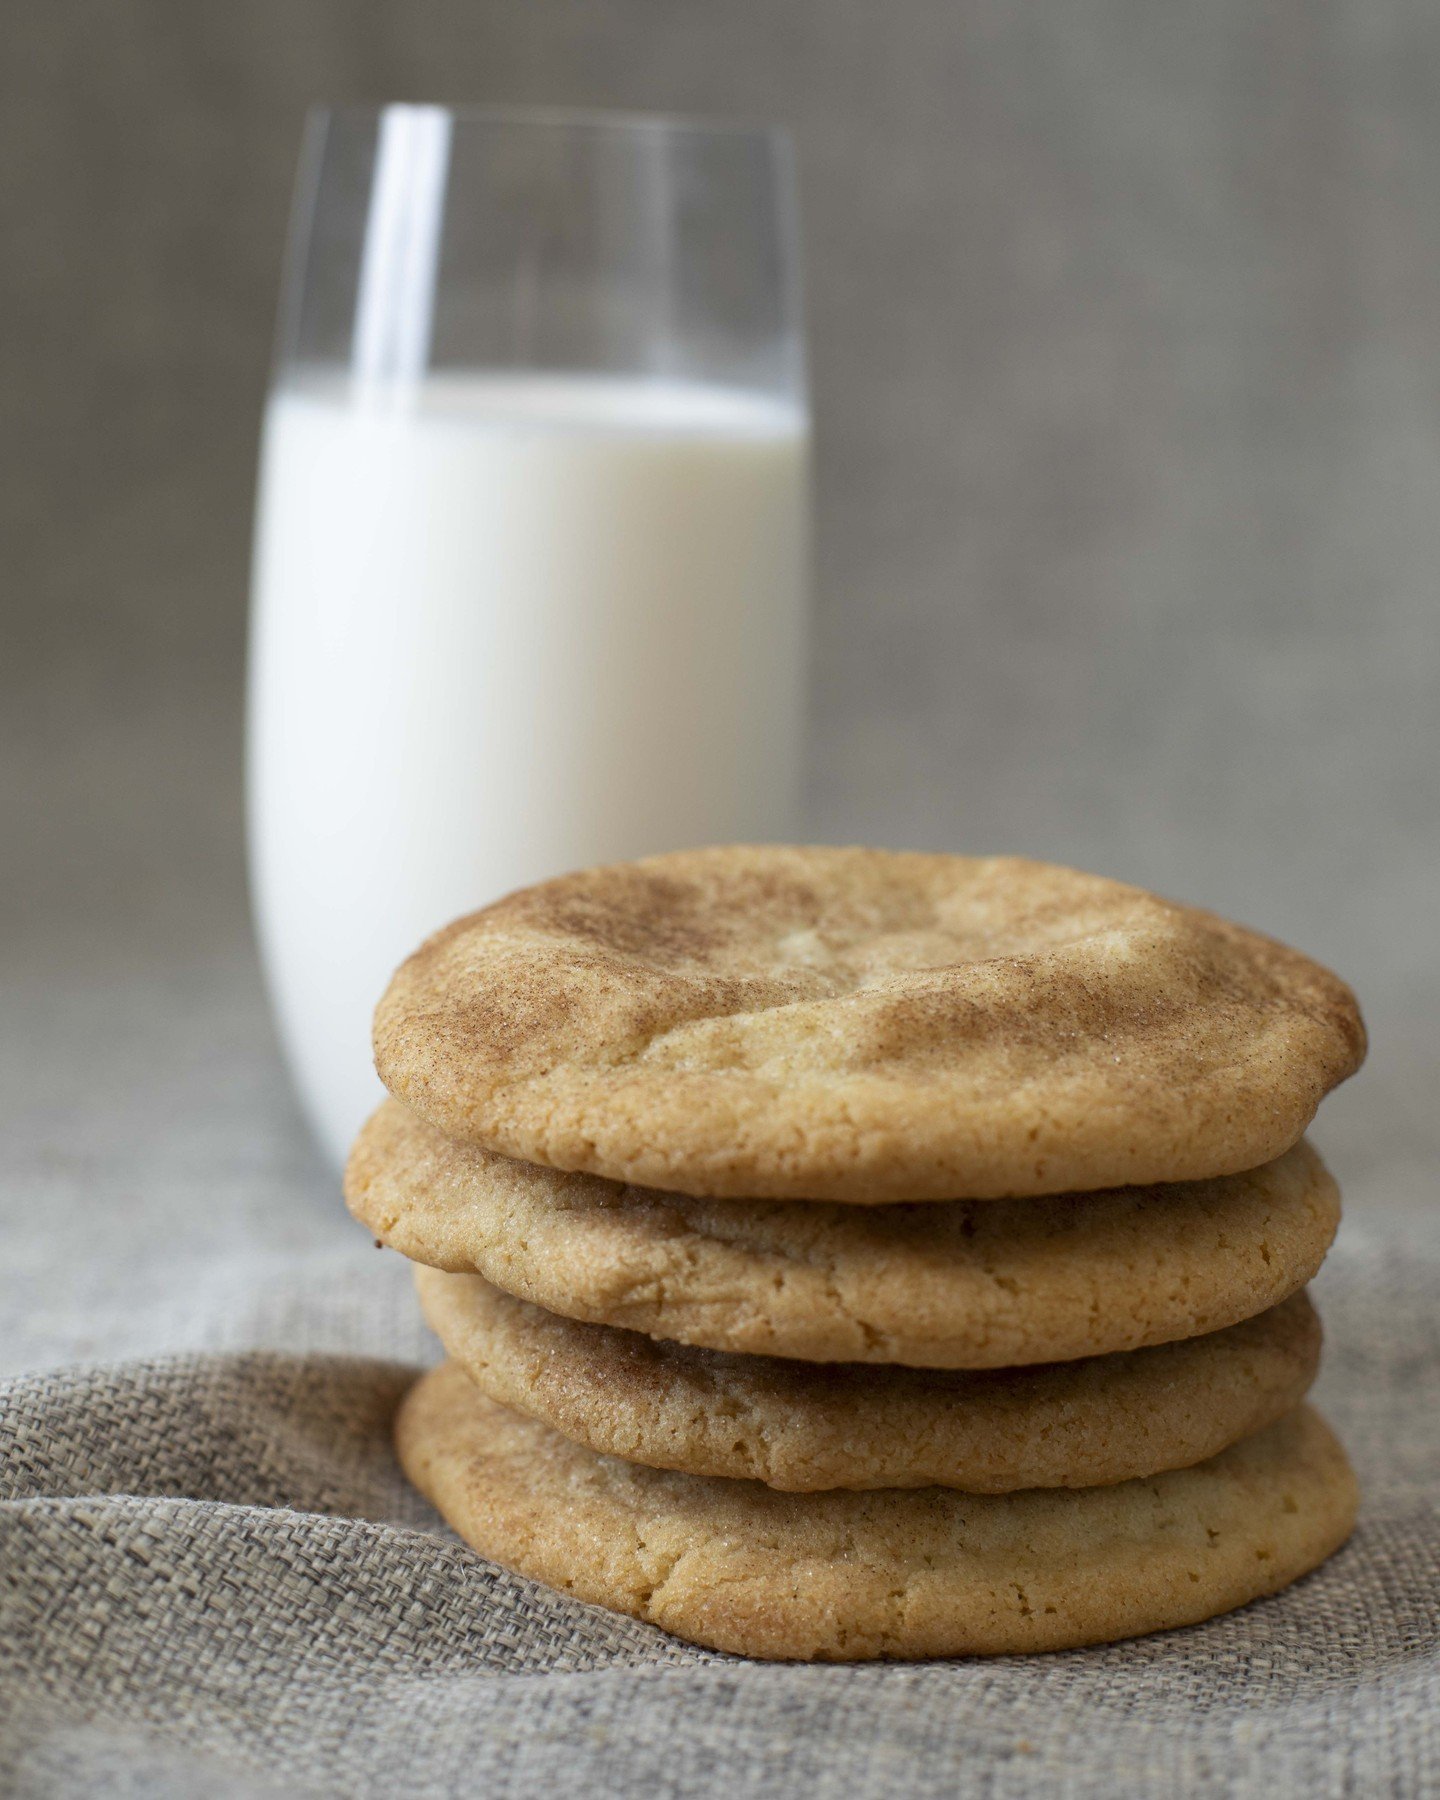 Calling all cookie lovers, the Snickerdoodle has returned! Soft and chewy with a sprinkle of cinnamon, the Snickerdoodle is a timeless classic for a reason. Try dunking them in milk, coffee, or tea!